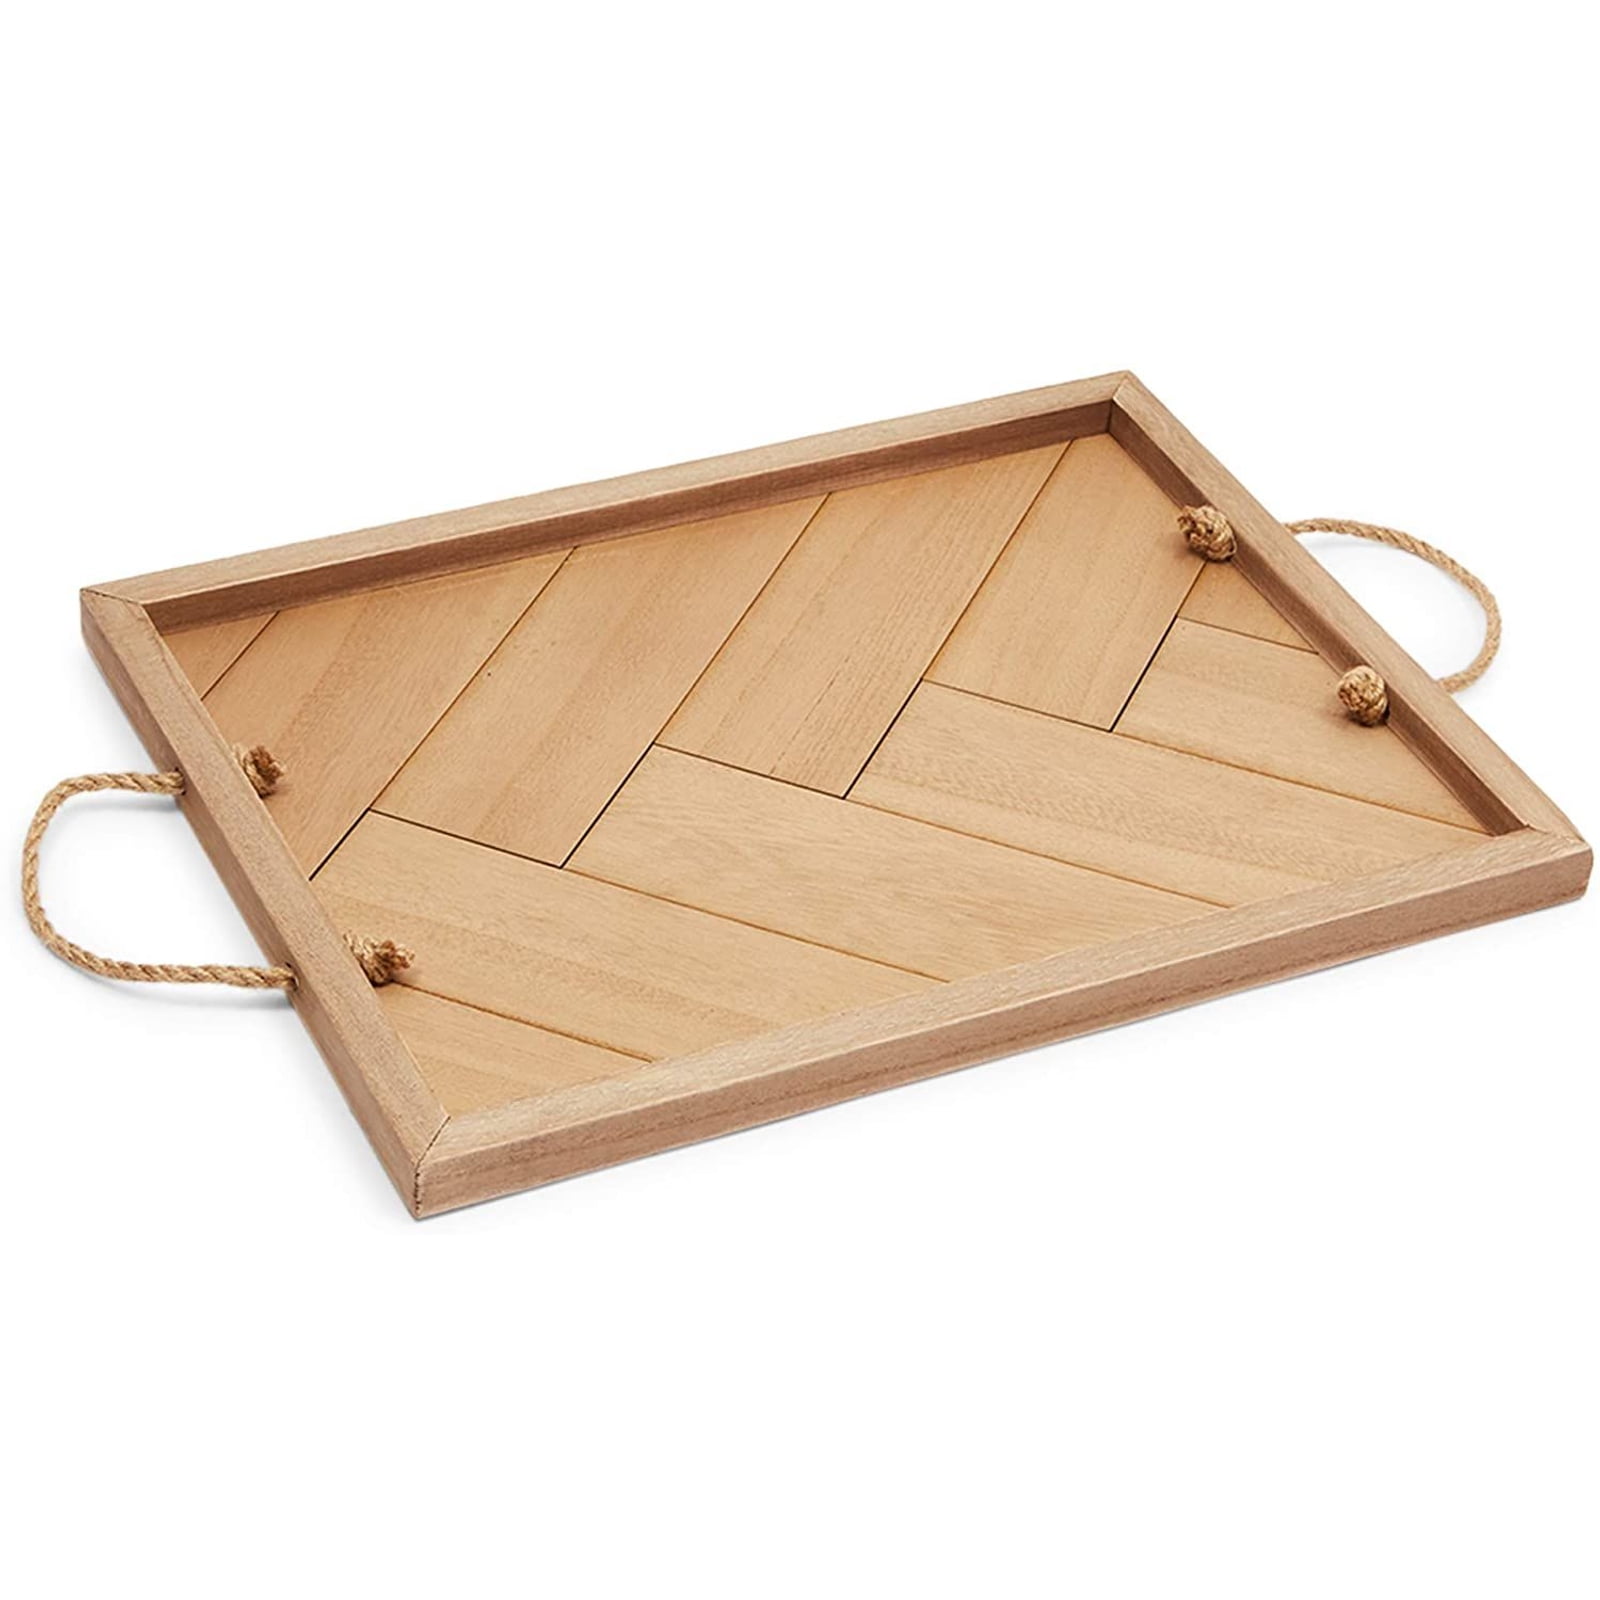 Wooden serving Tray with handles 20 Inch Large for Breakfast Food Bed TV tray 